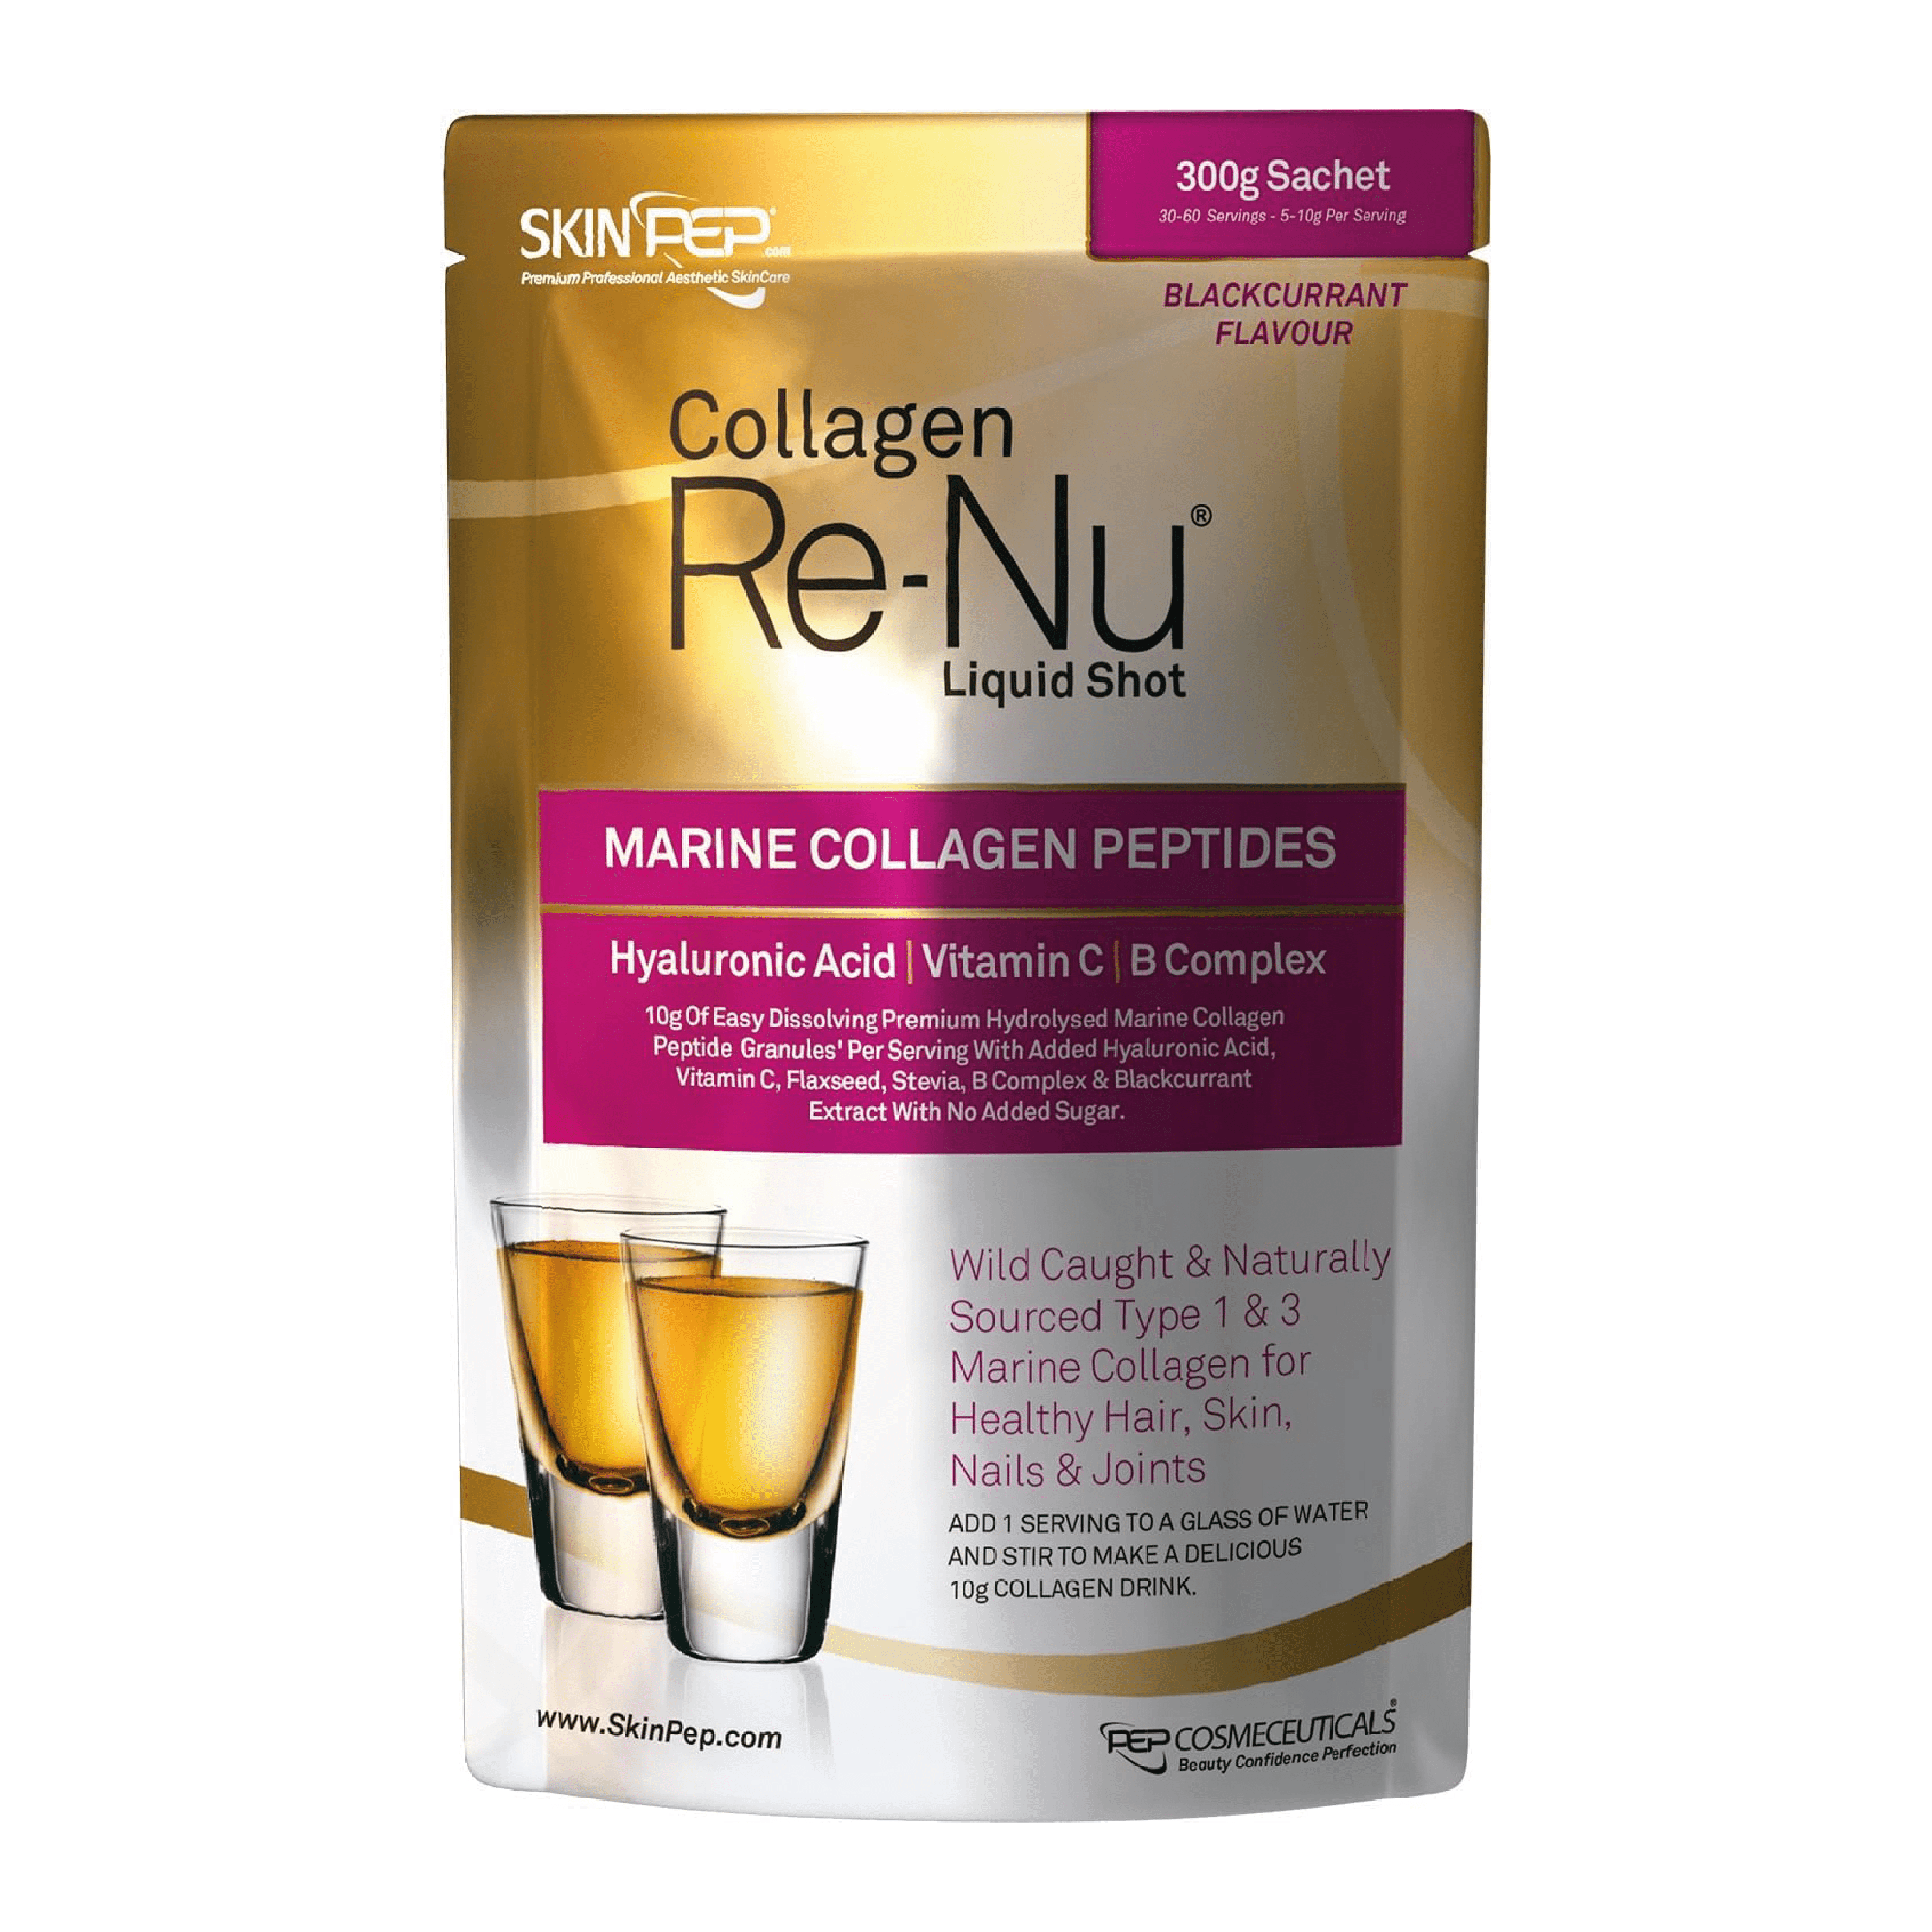 SkinPep® Collagen Re-Nu: Premium 300g hydrolyzed marine collagen powder with Vit C, B Complex, Hyaluronic Acid, & Stevia. Delightful taste, no fishy smell. Ideal for 30 days of radiant skincare and overall well-being.